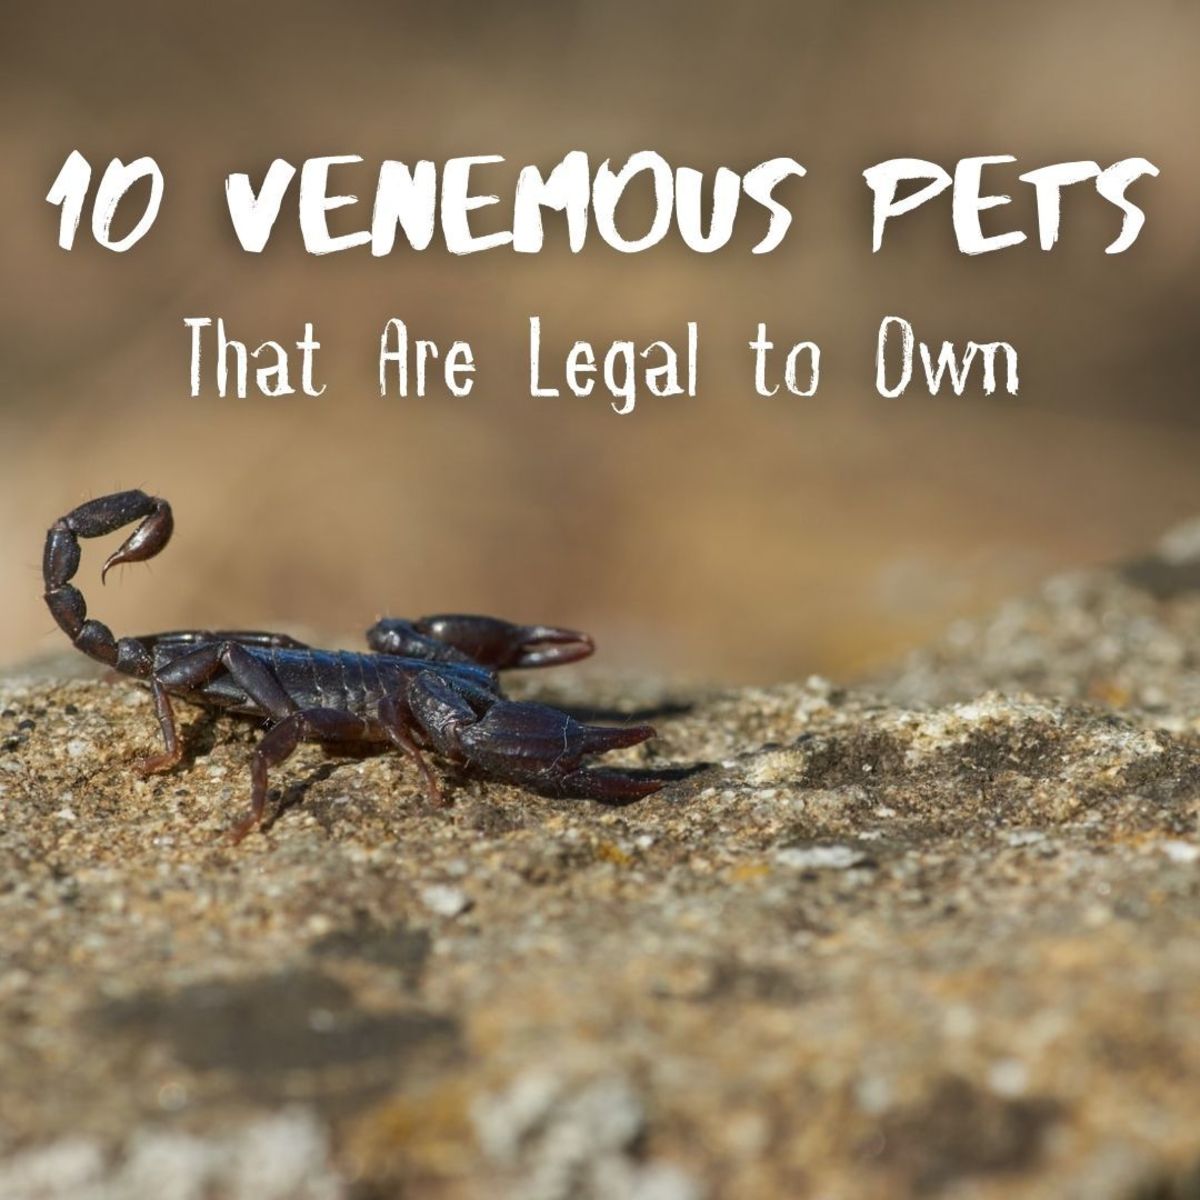 10 Venomous Pets That Are Legal to Own - PetHelpful